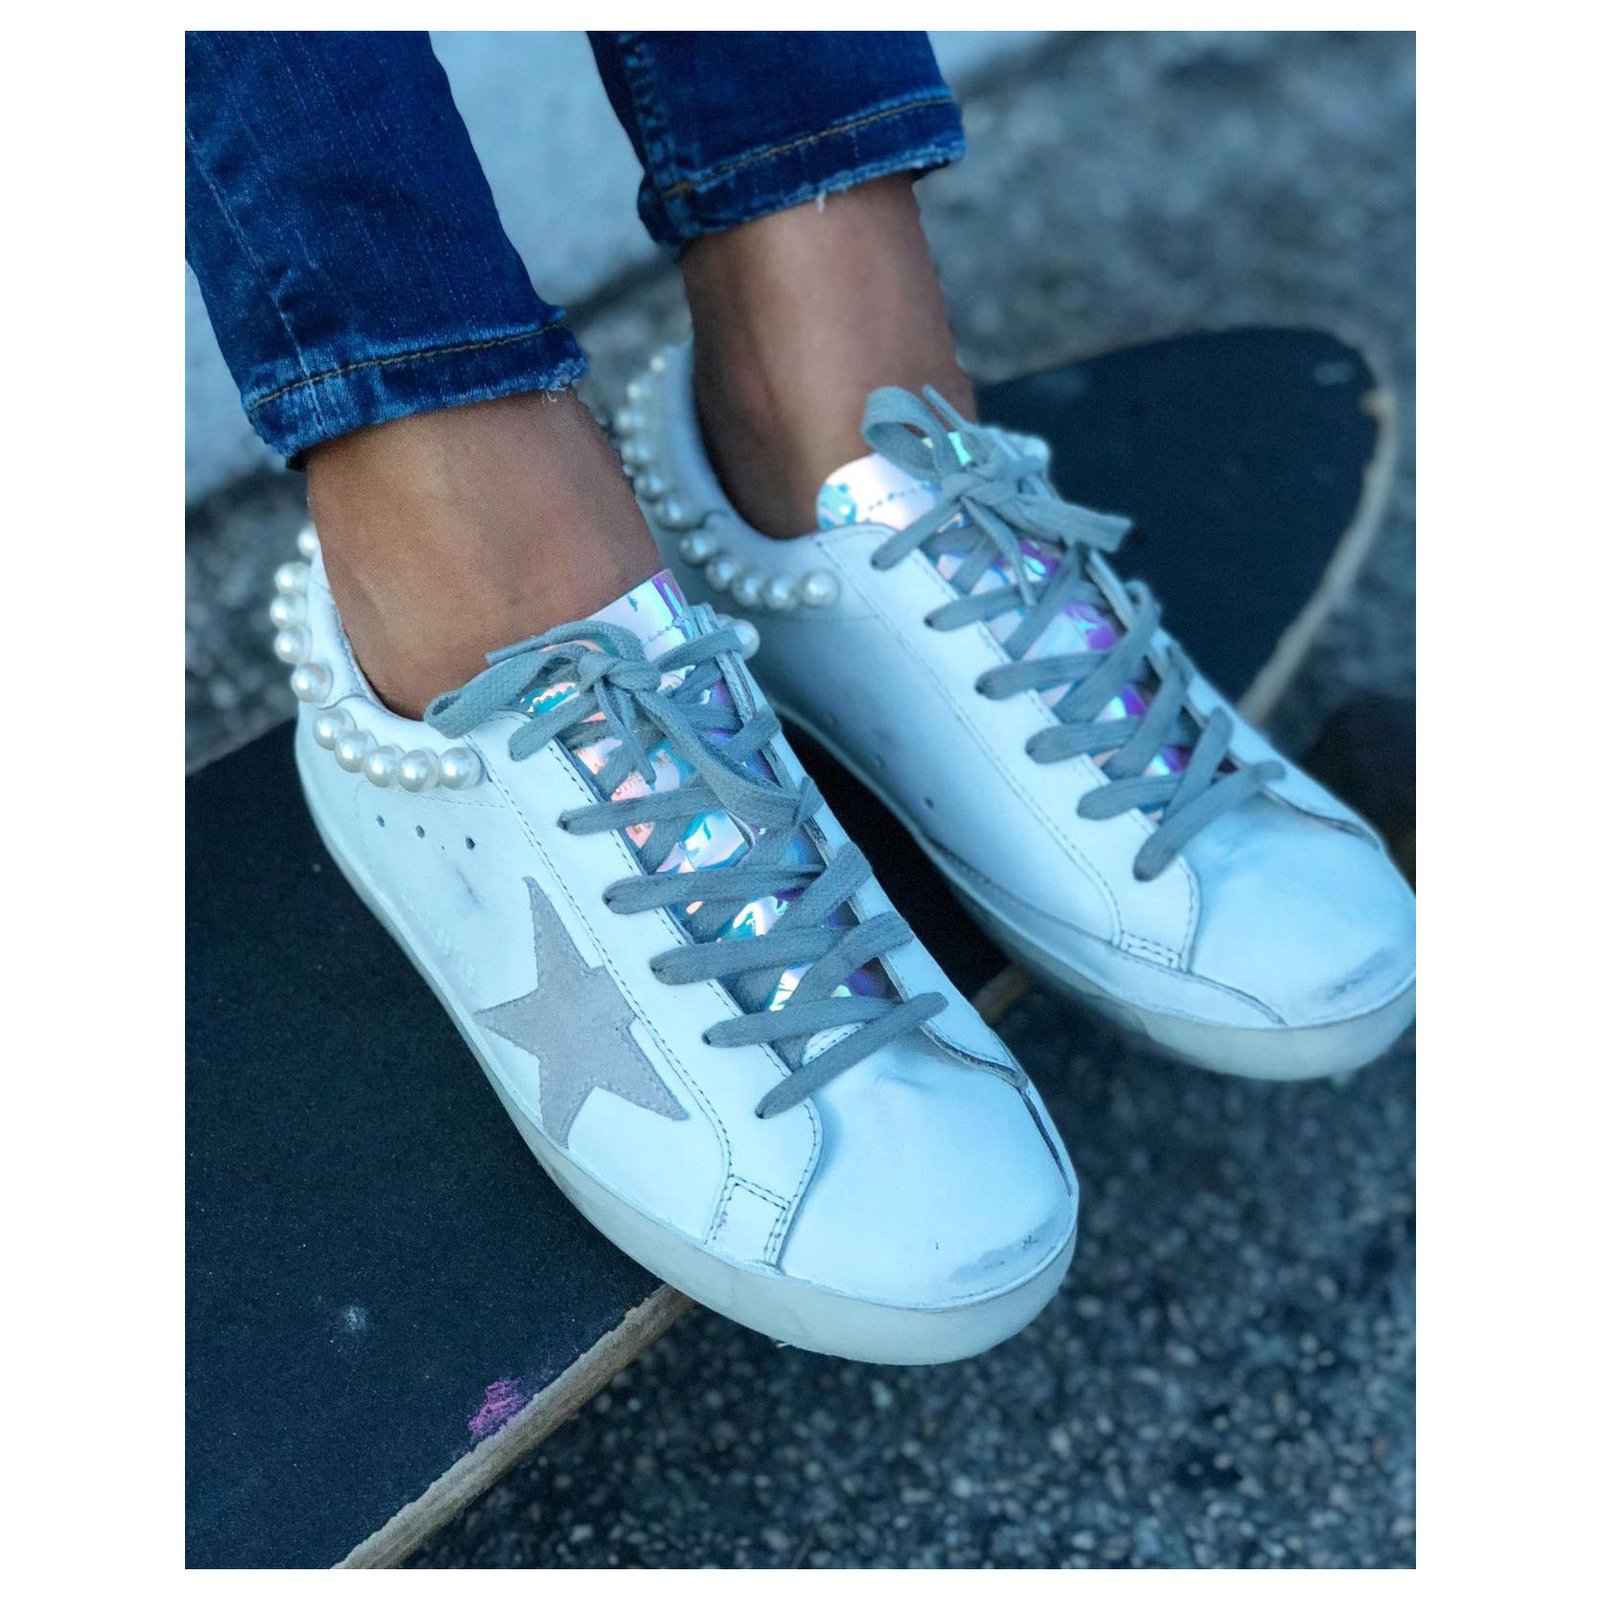 golden goose sneakers with pearls